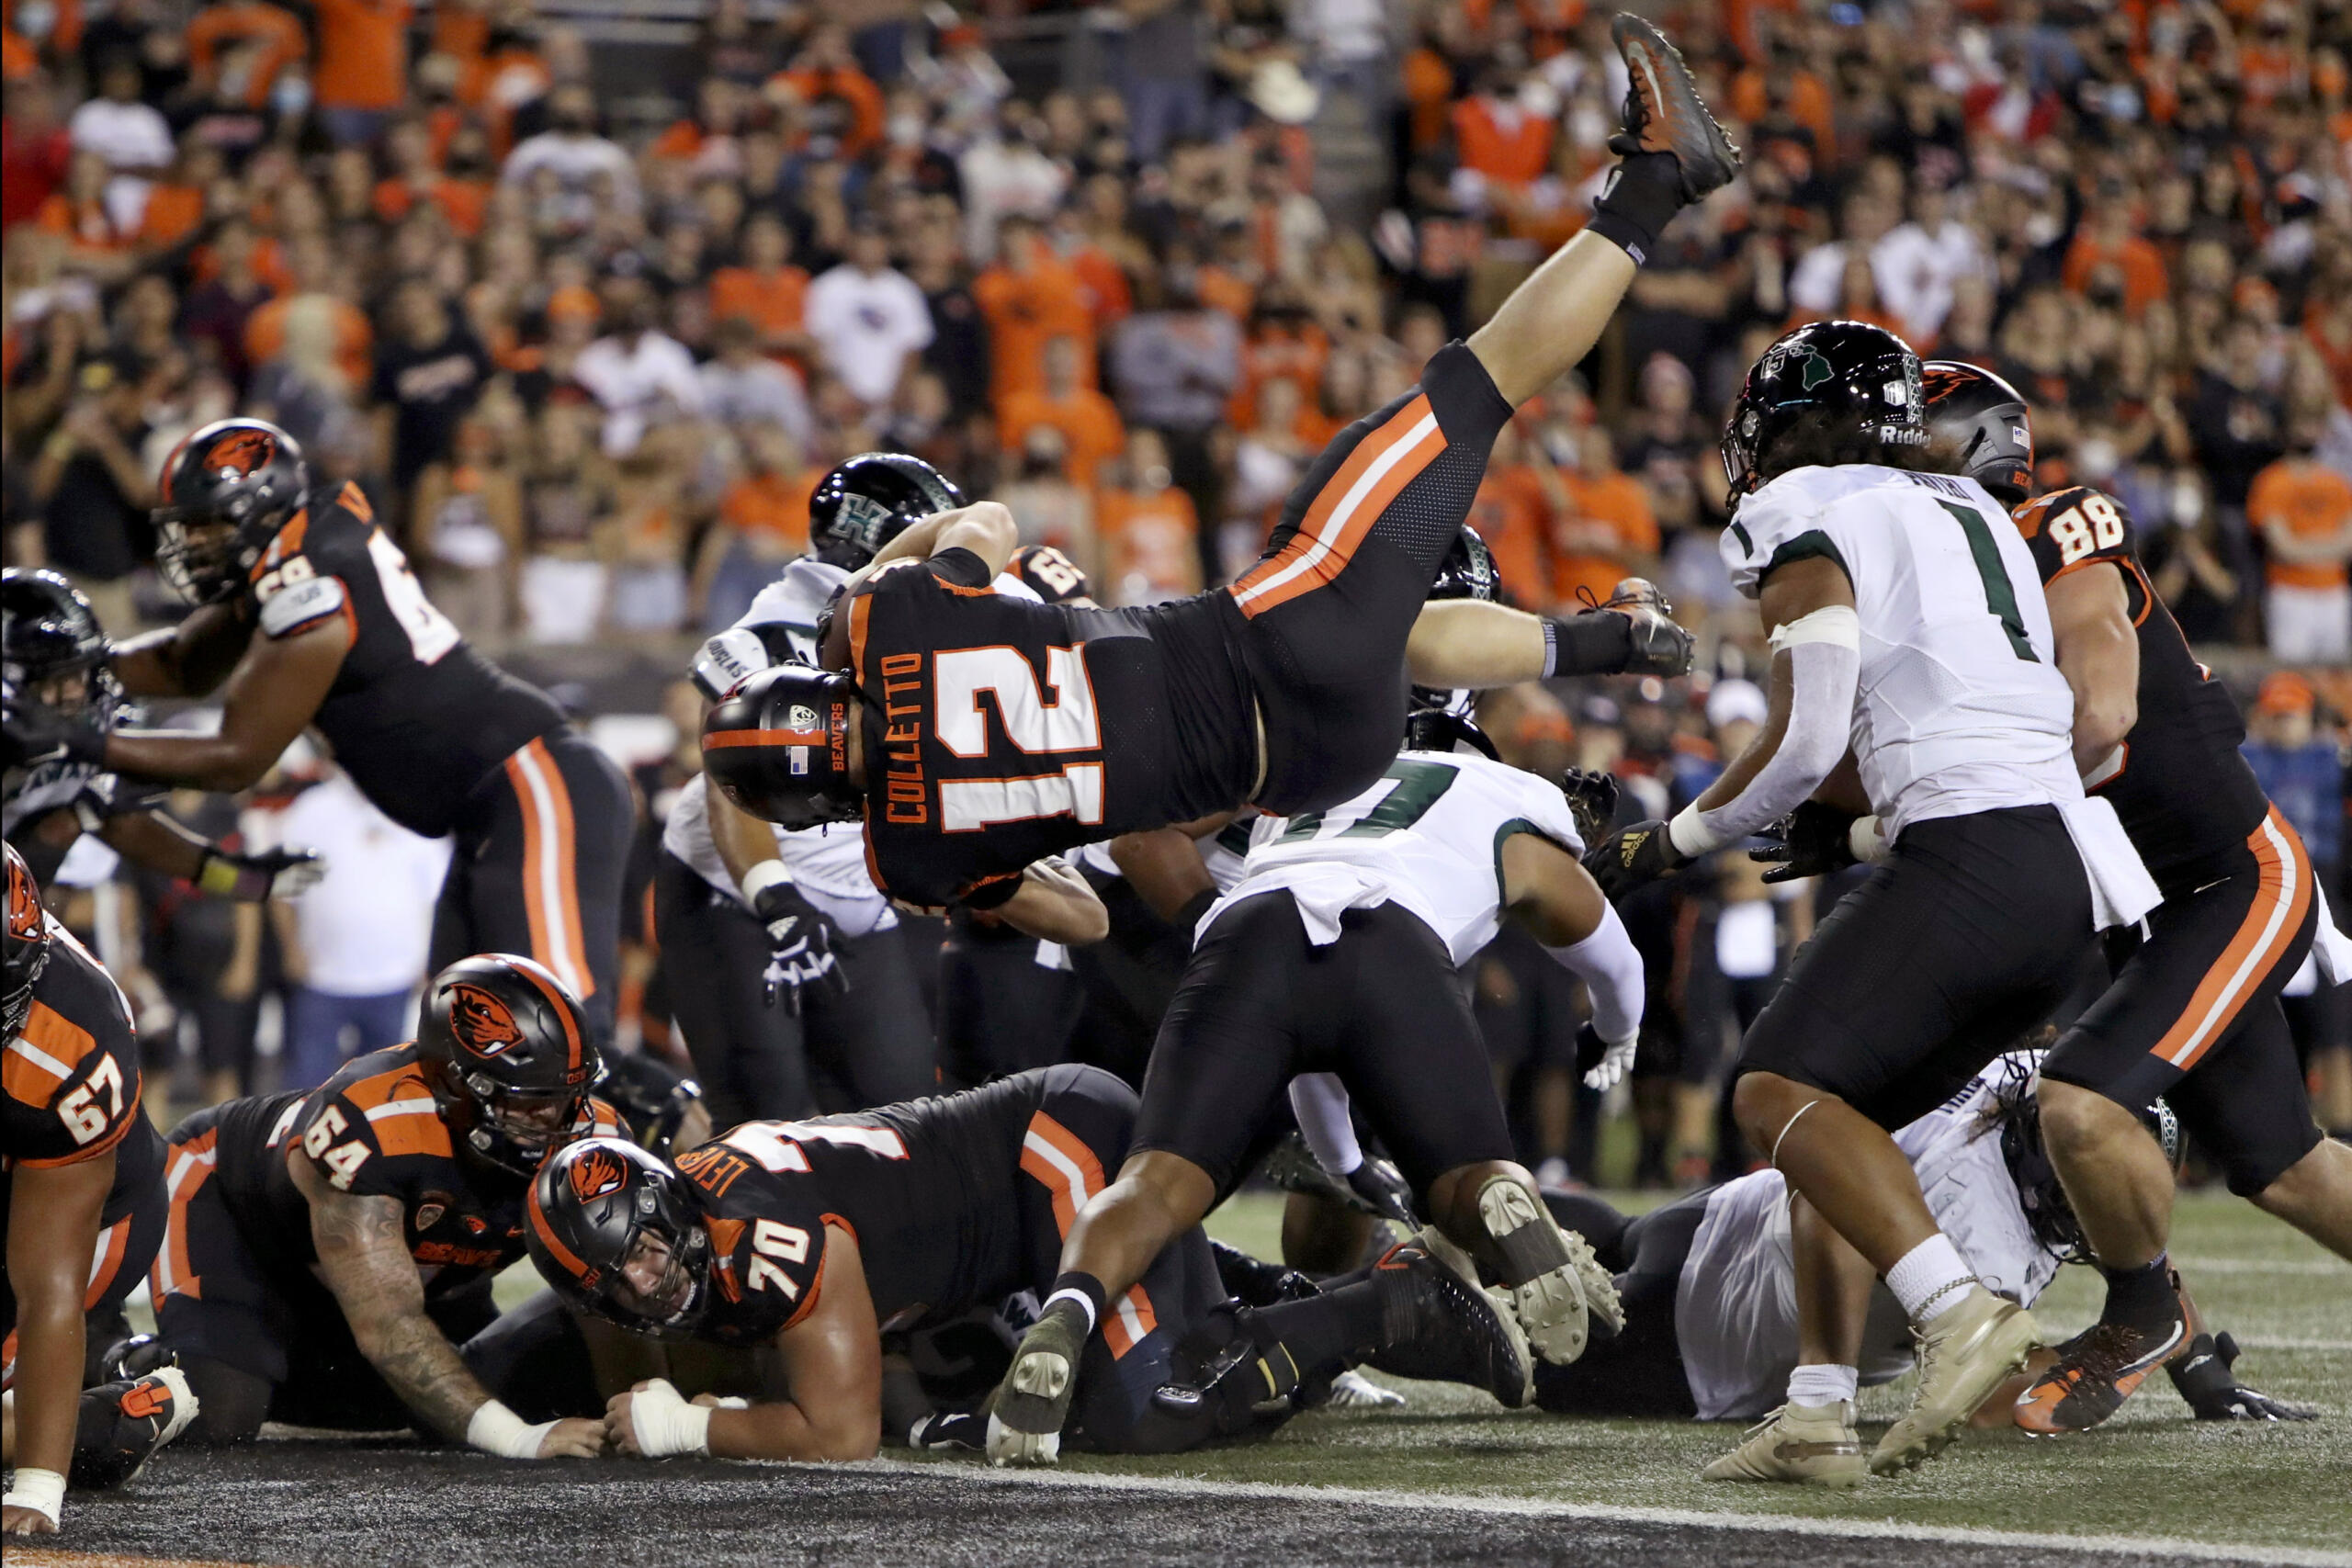 Oregon State inside linebacker Jack Colletto (12) flies backwards into the end zone for a touchdown during the first half of an NCAA college football game against Hawaii Saturday, Sept. 11, 2021, in Corvallis, Ore.